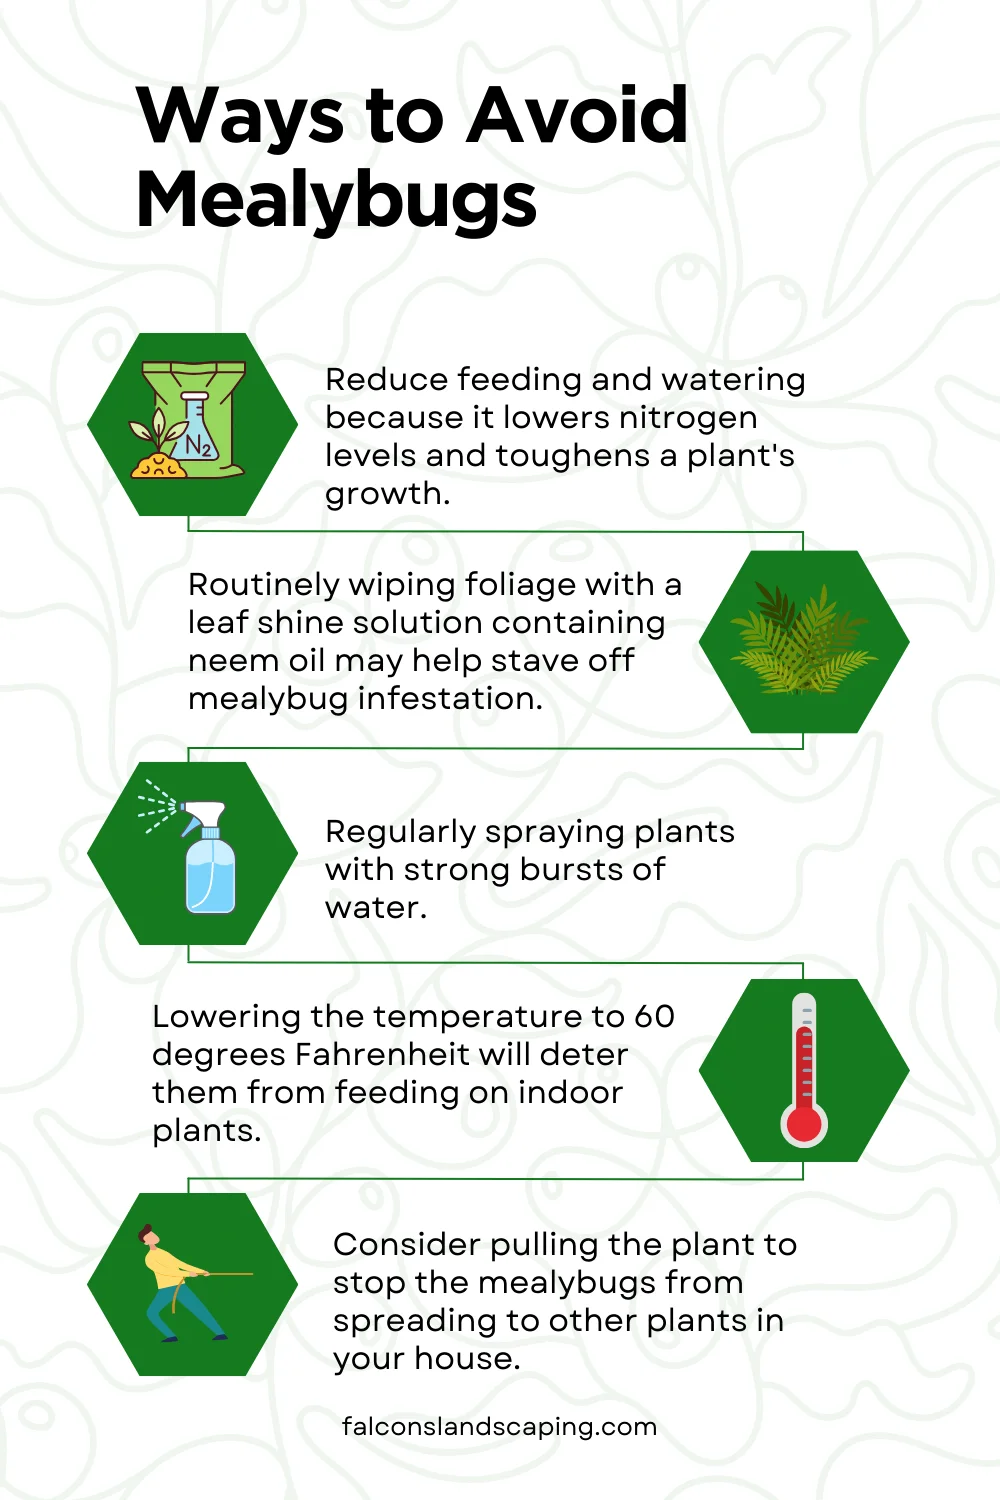 An infographic on the top ways to avoid mealybugs